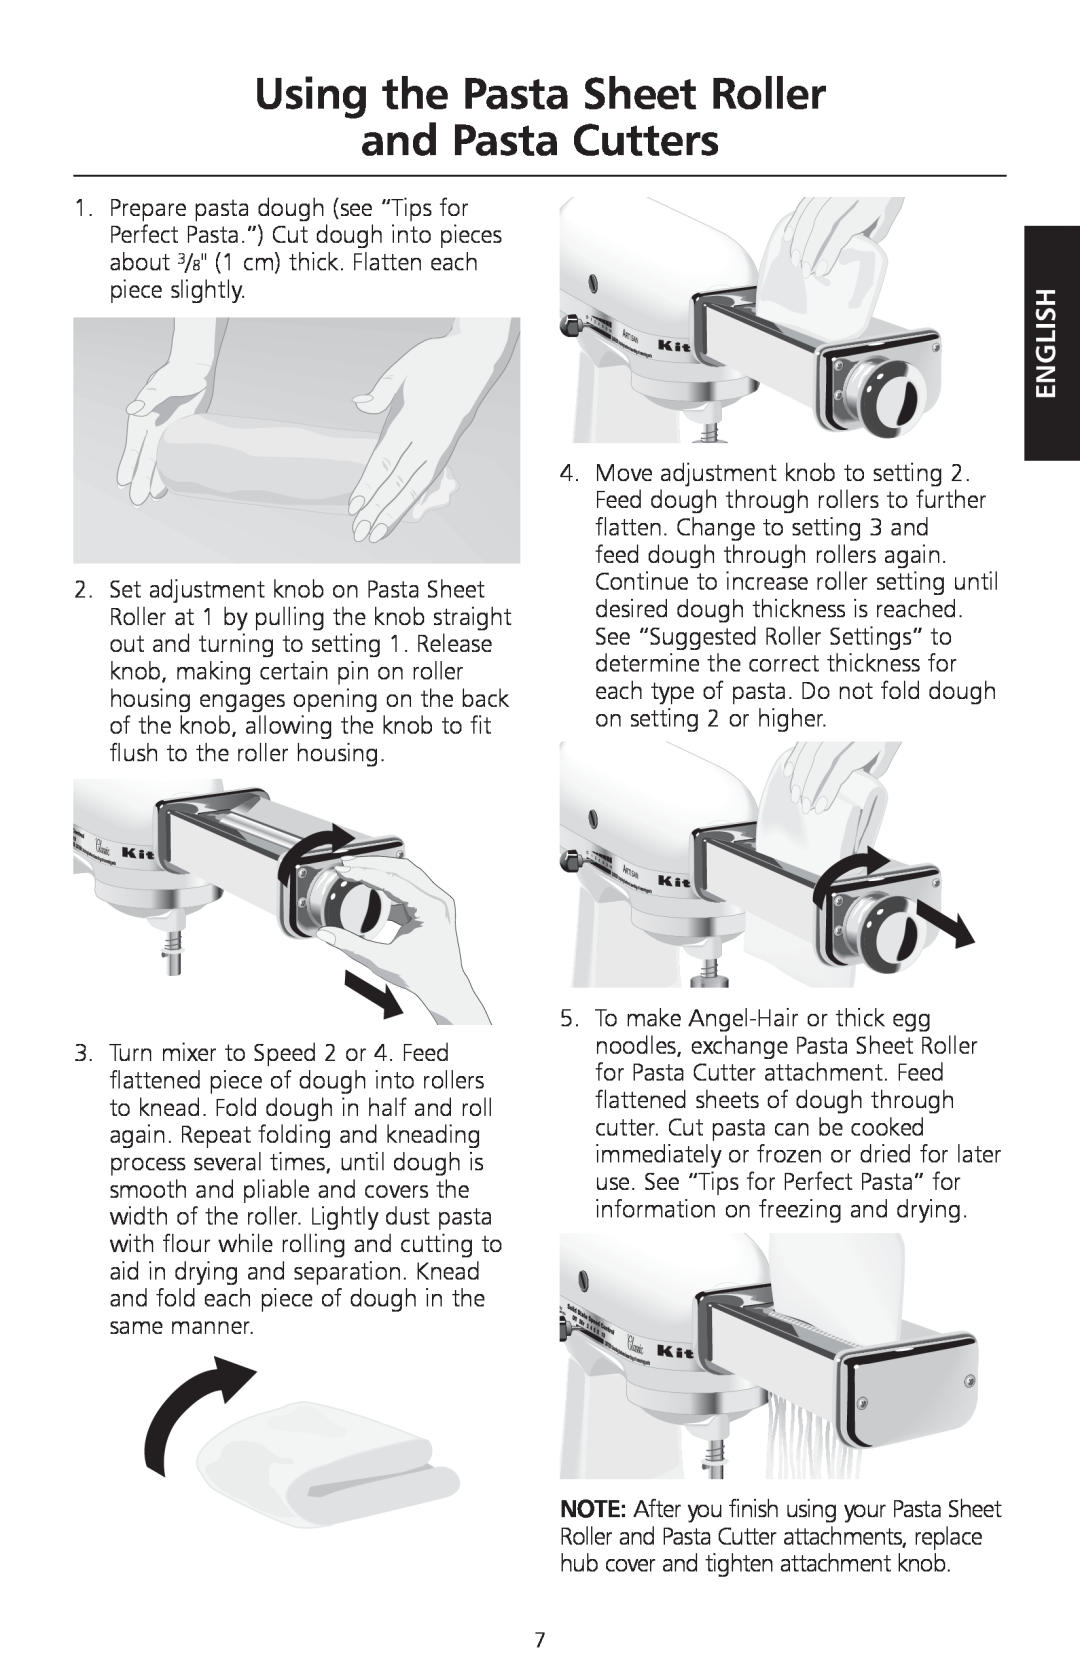 KitchenAid KPEX manual Using the Pasta Sheet Roller and Pasta Cutters, English 